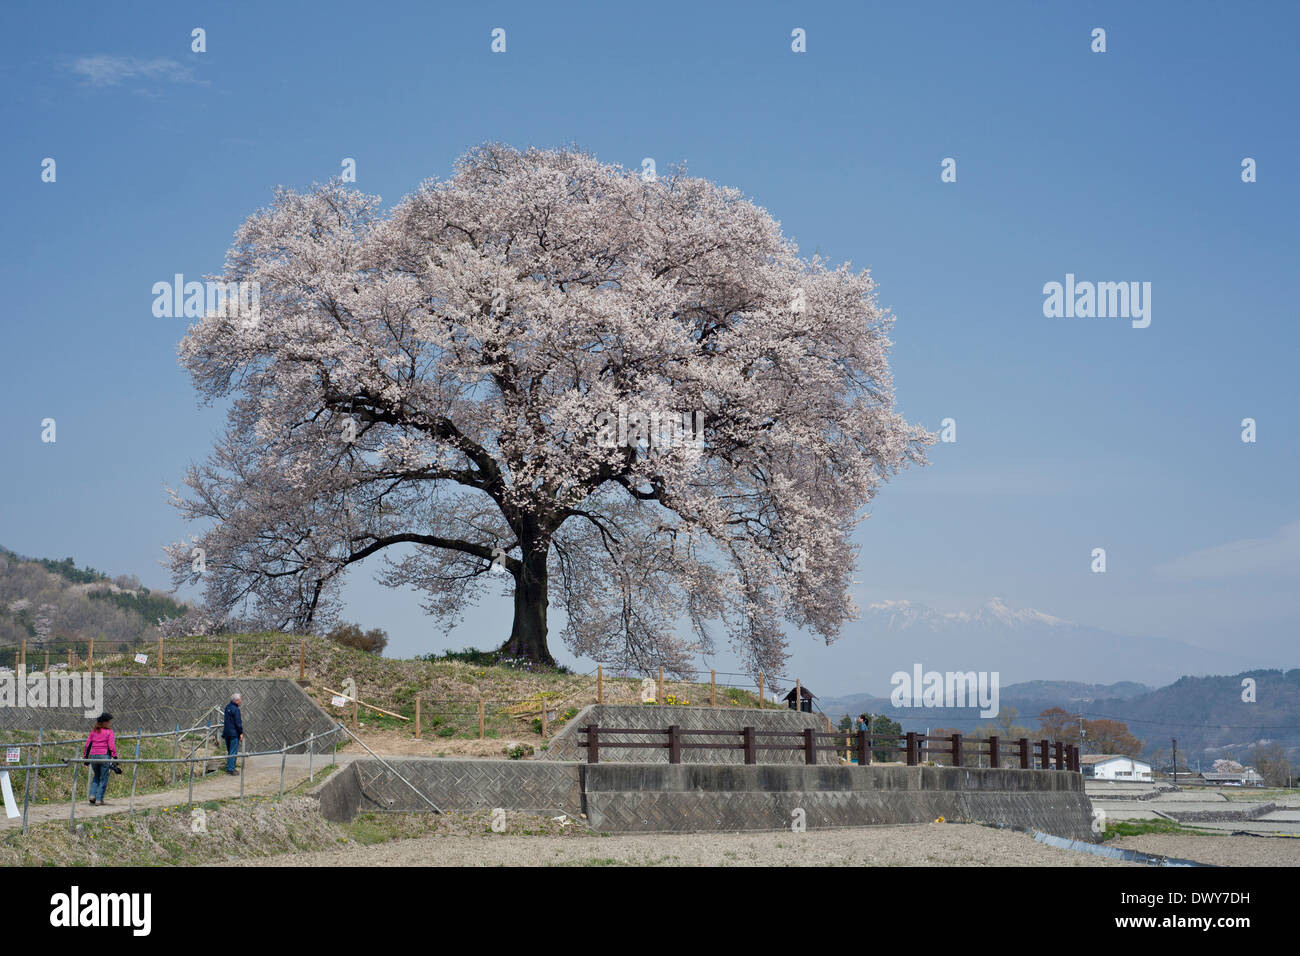 Blooming cherry tree in Yamanashi Prefecture, Japan Stock Photo